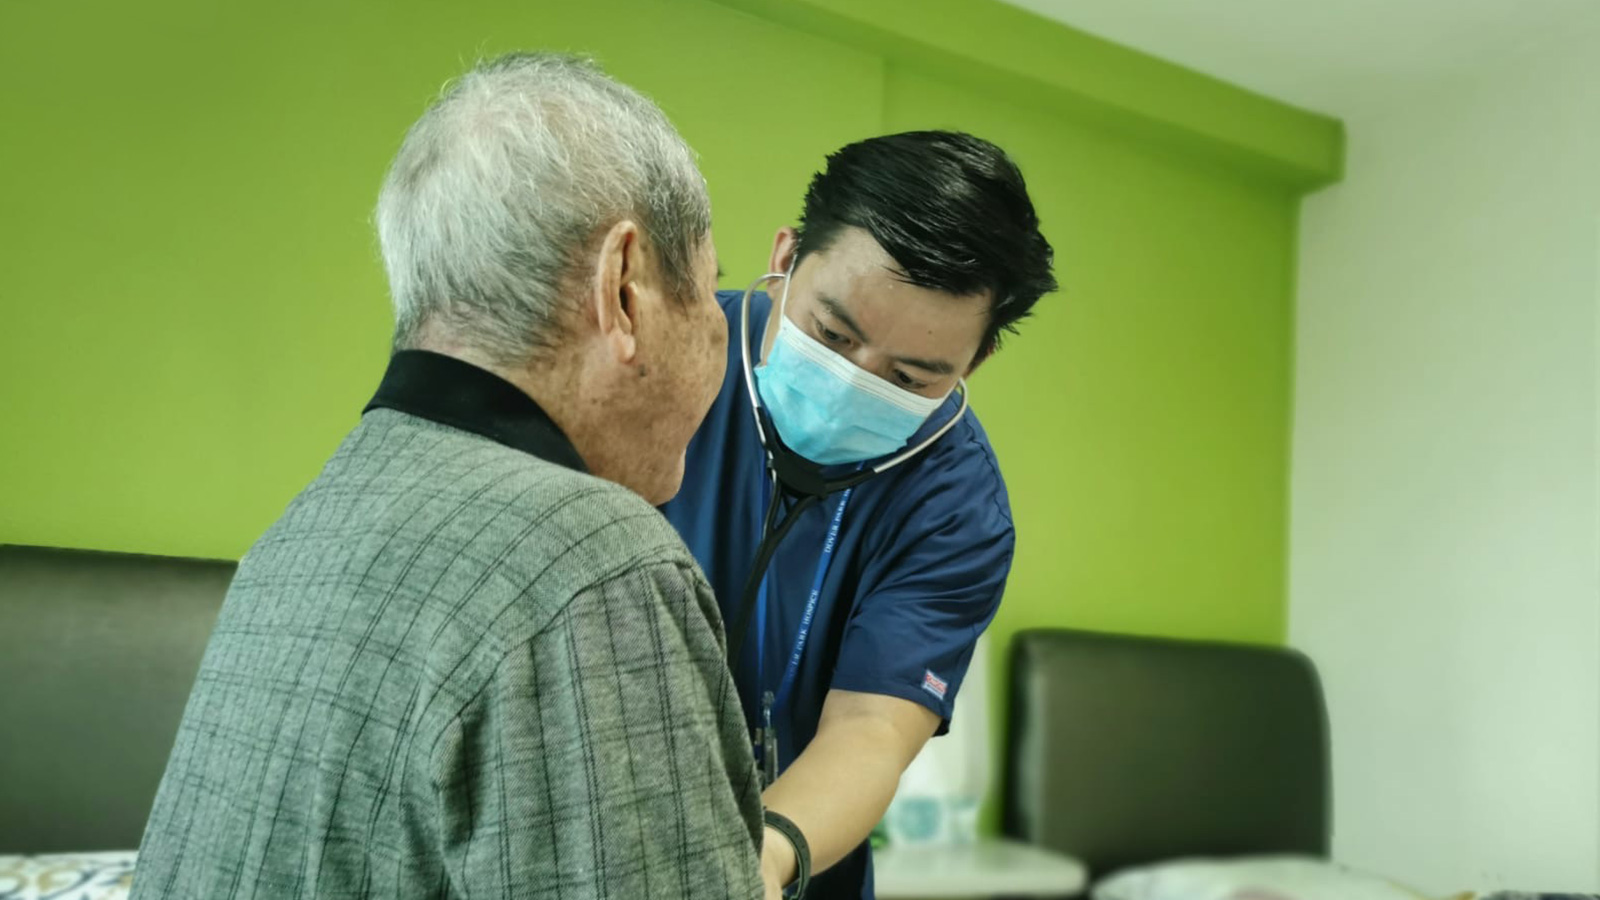 Healthcare worker caring for patient